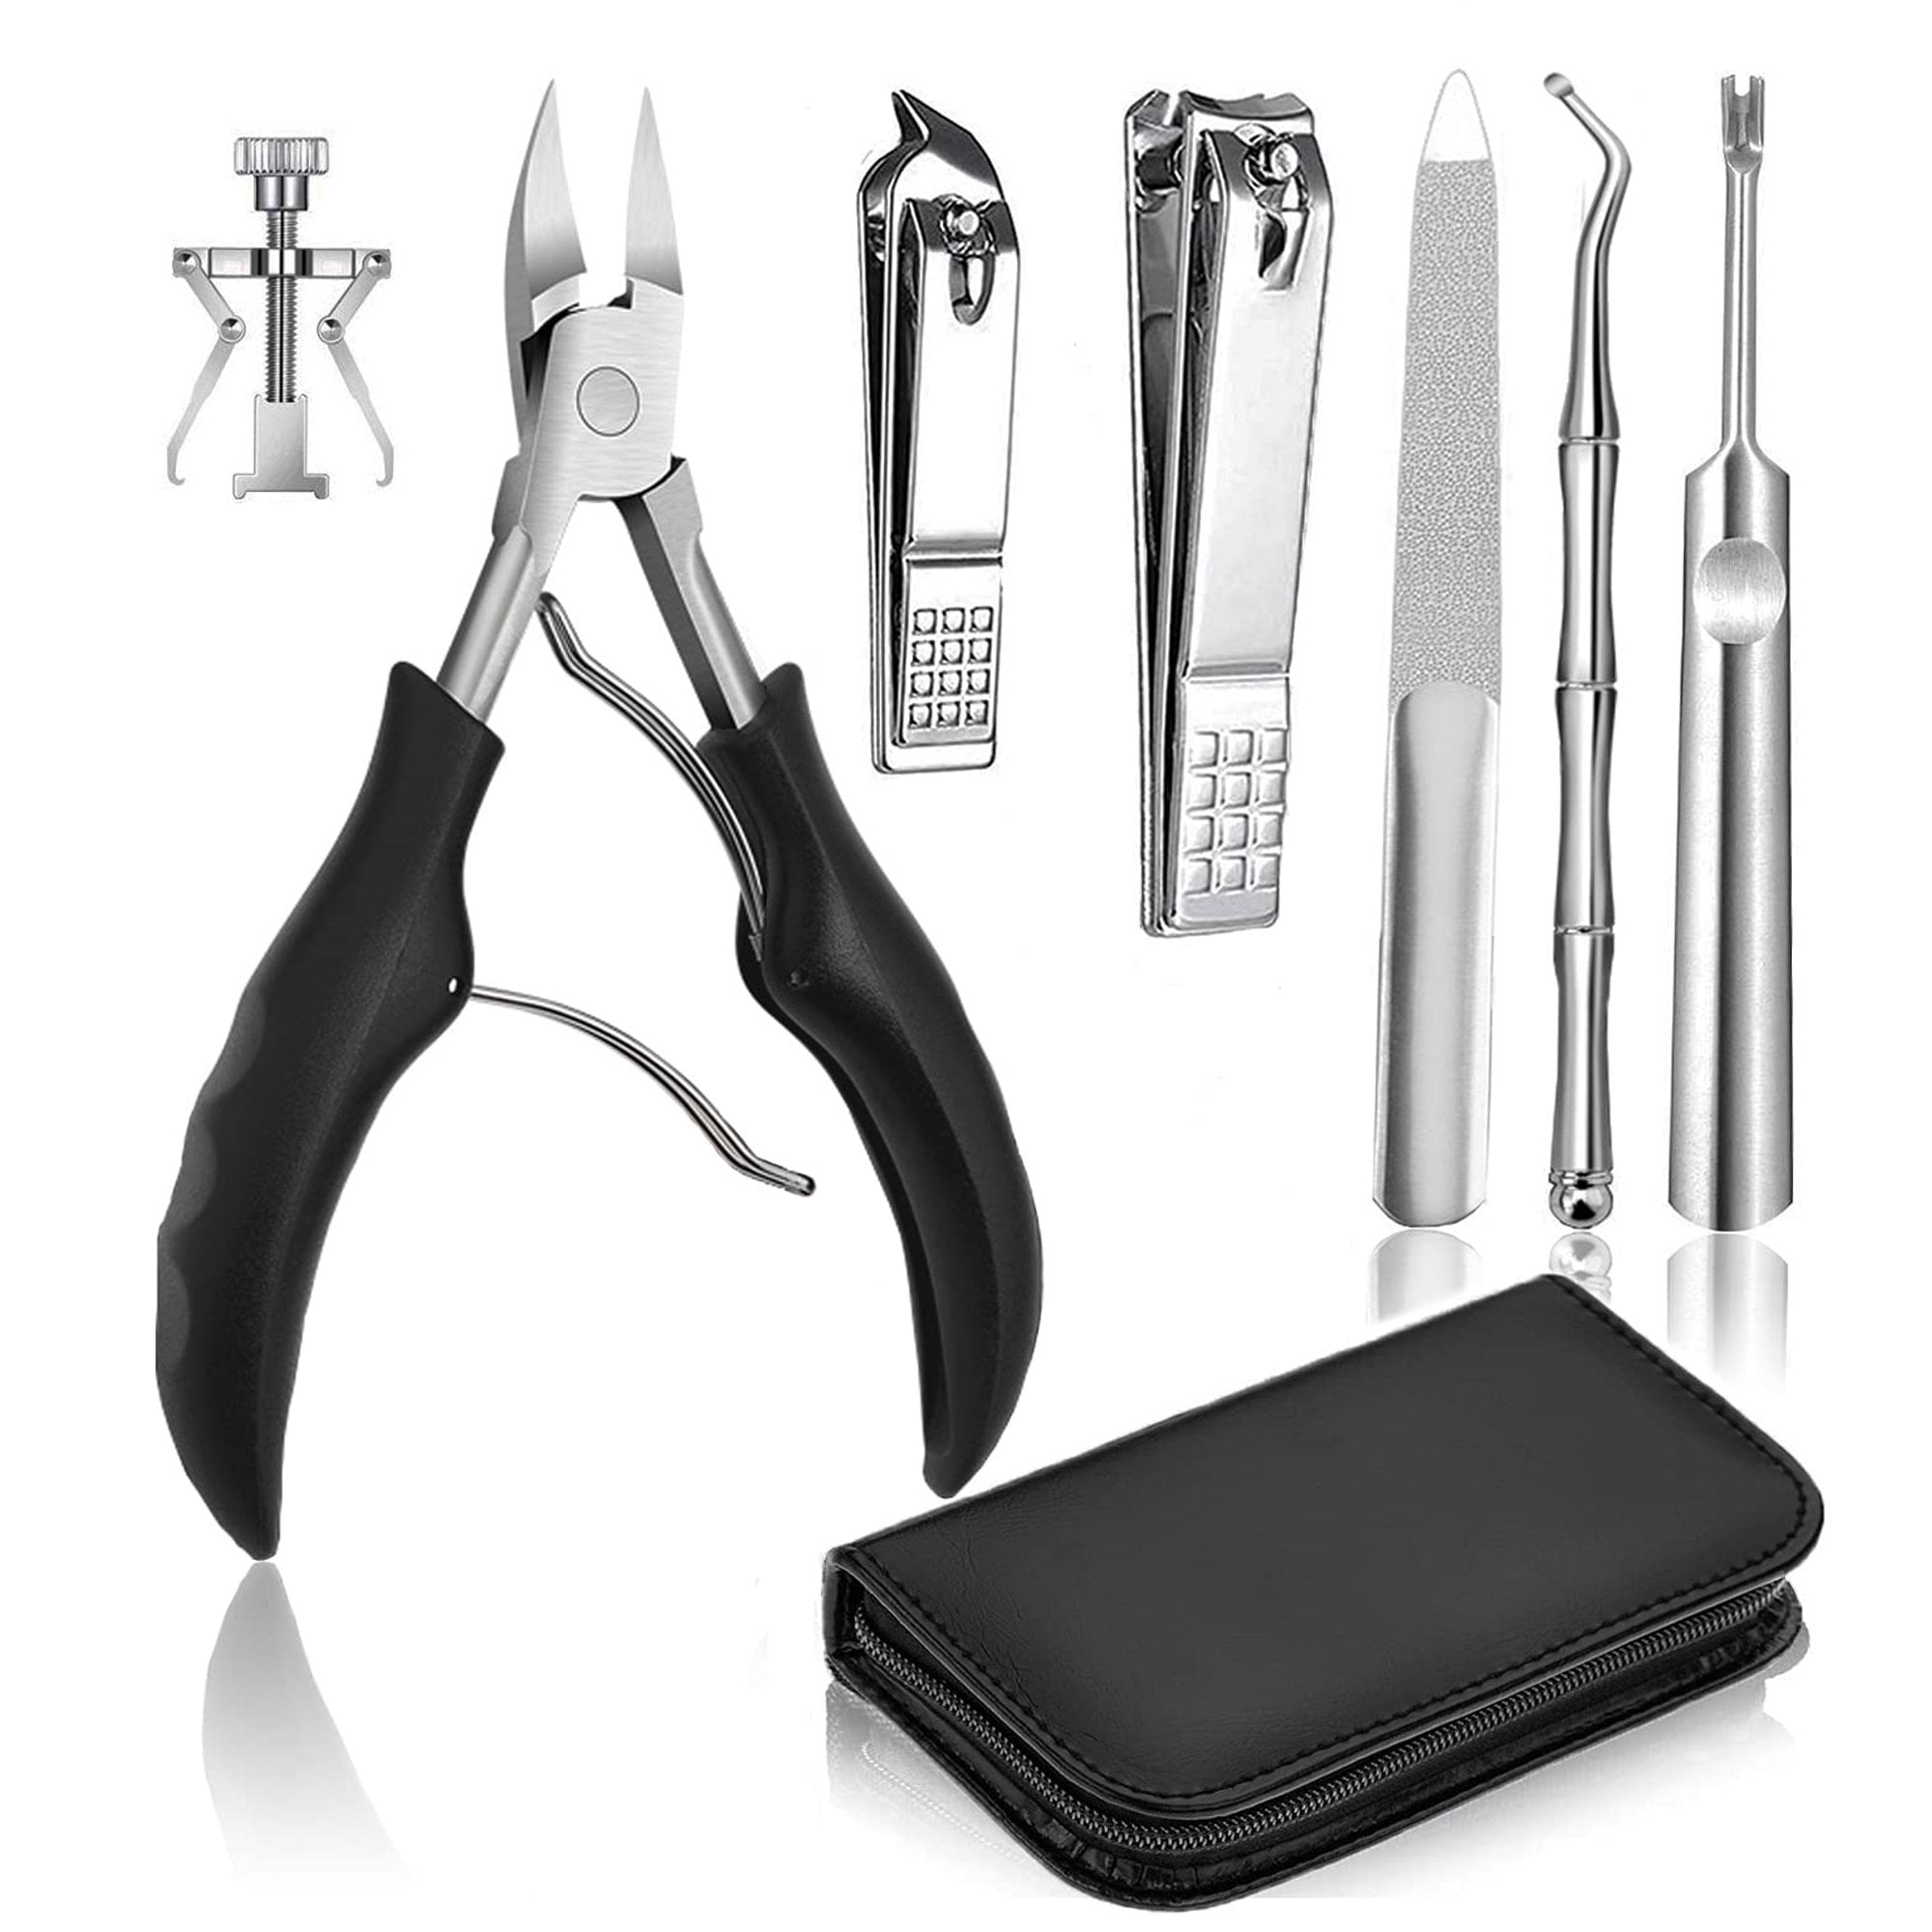 Toenail Clippers for Seniors Thick Nails - Wide Jaw Opening Extra Large Toe Nail  Clippers with Catcher, Professional Sharp Curved Blade Heavy Duty Clipper  Pro Nail Cutter for Seniors Long Handle 